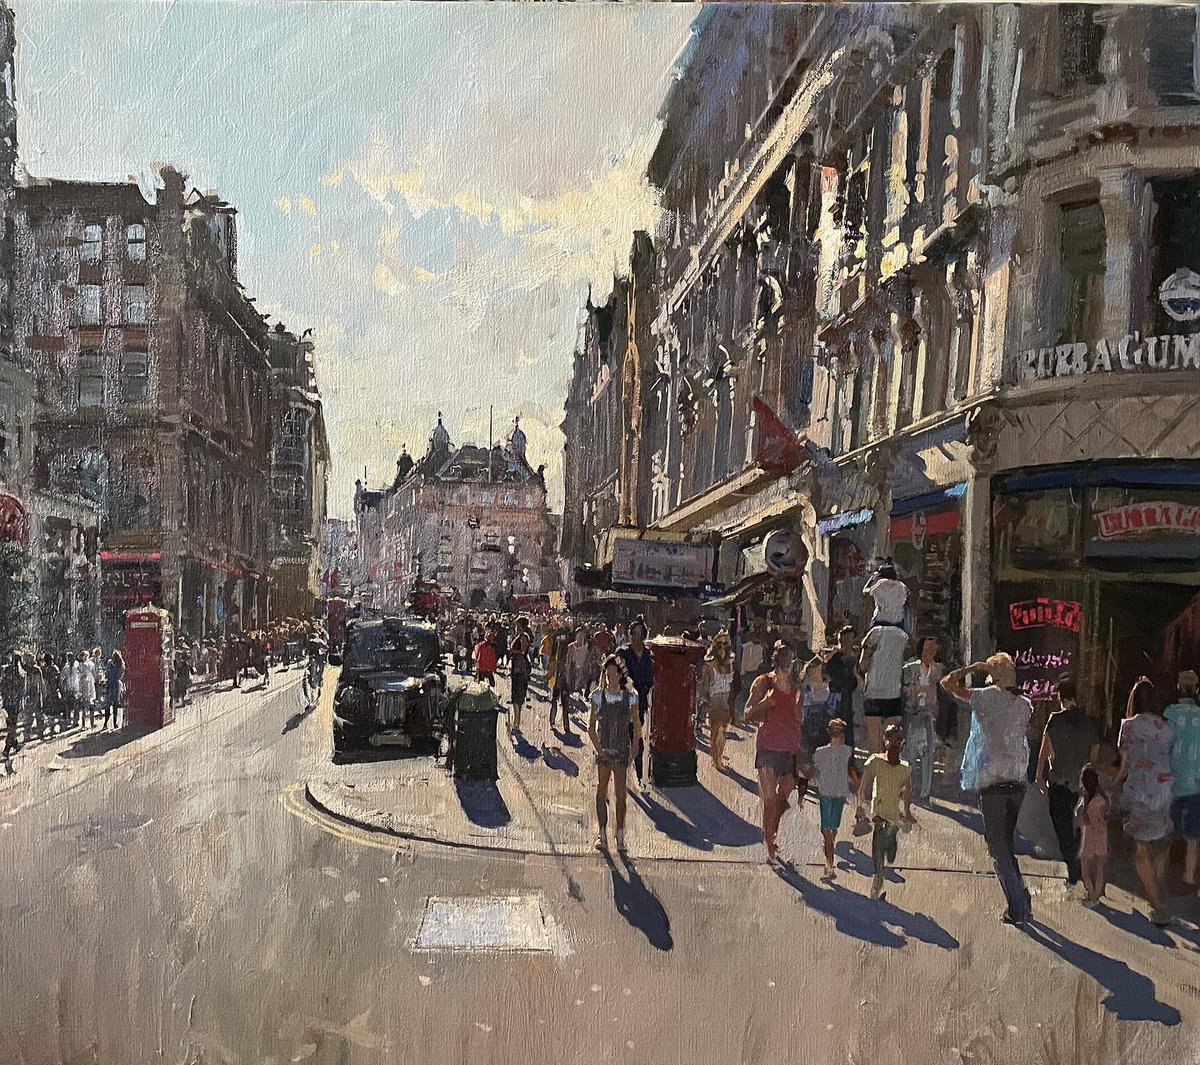 #finished 30 x 35 inches #oiloncanvas looking west to #piccadillycircus from #coventrystreet and #rupertstreet #w1 #london #lovelondon #londonlife #pleinair #neac #contemporaryart #painting #art #oilpainting